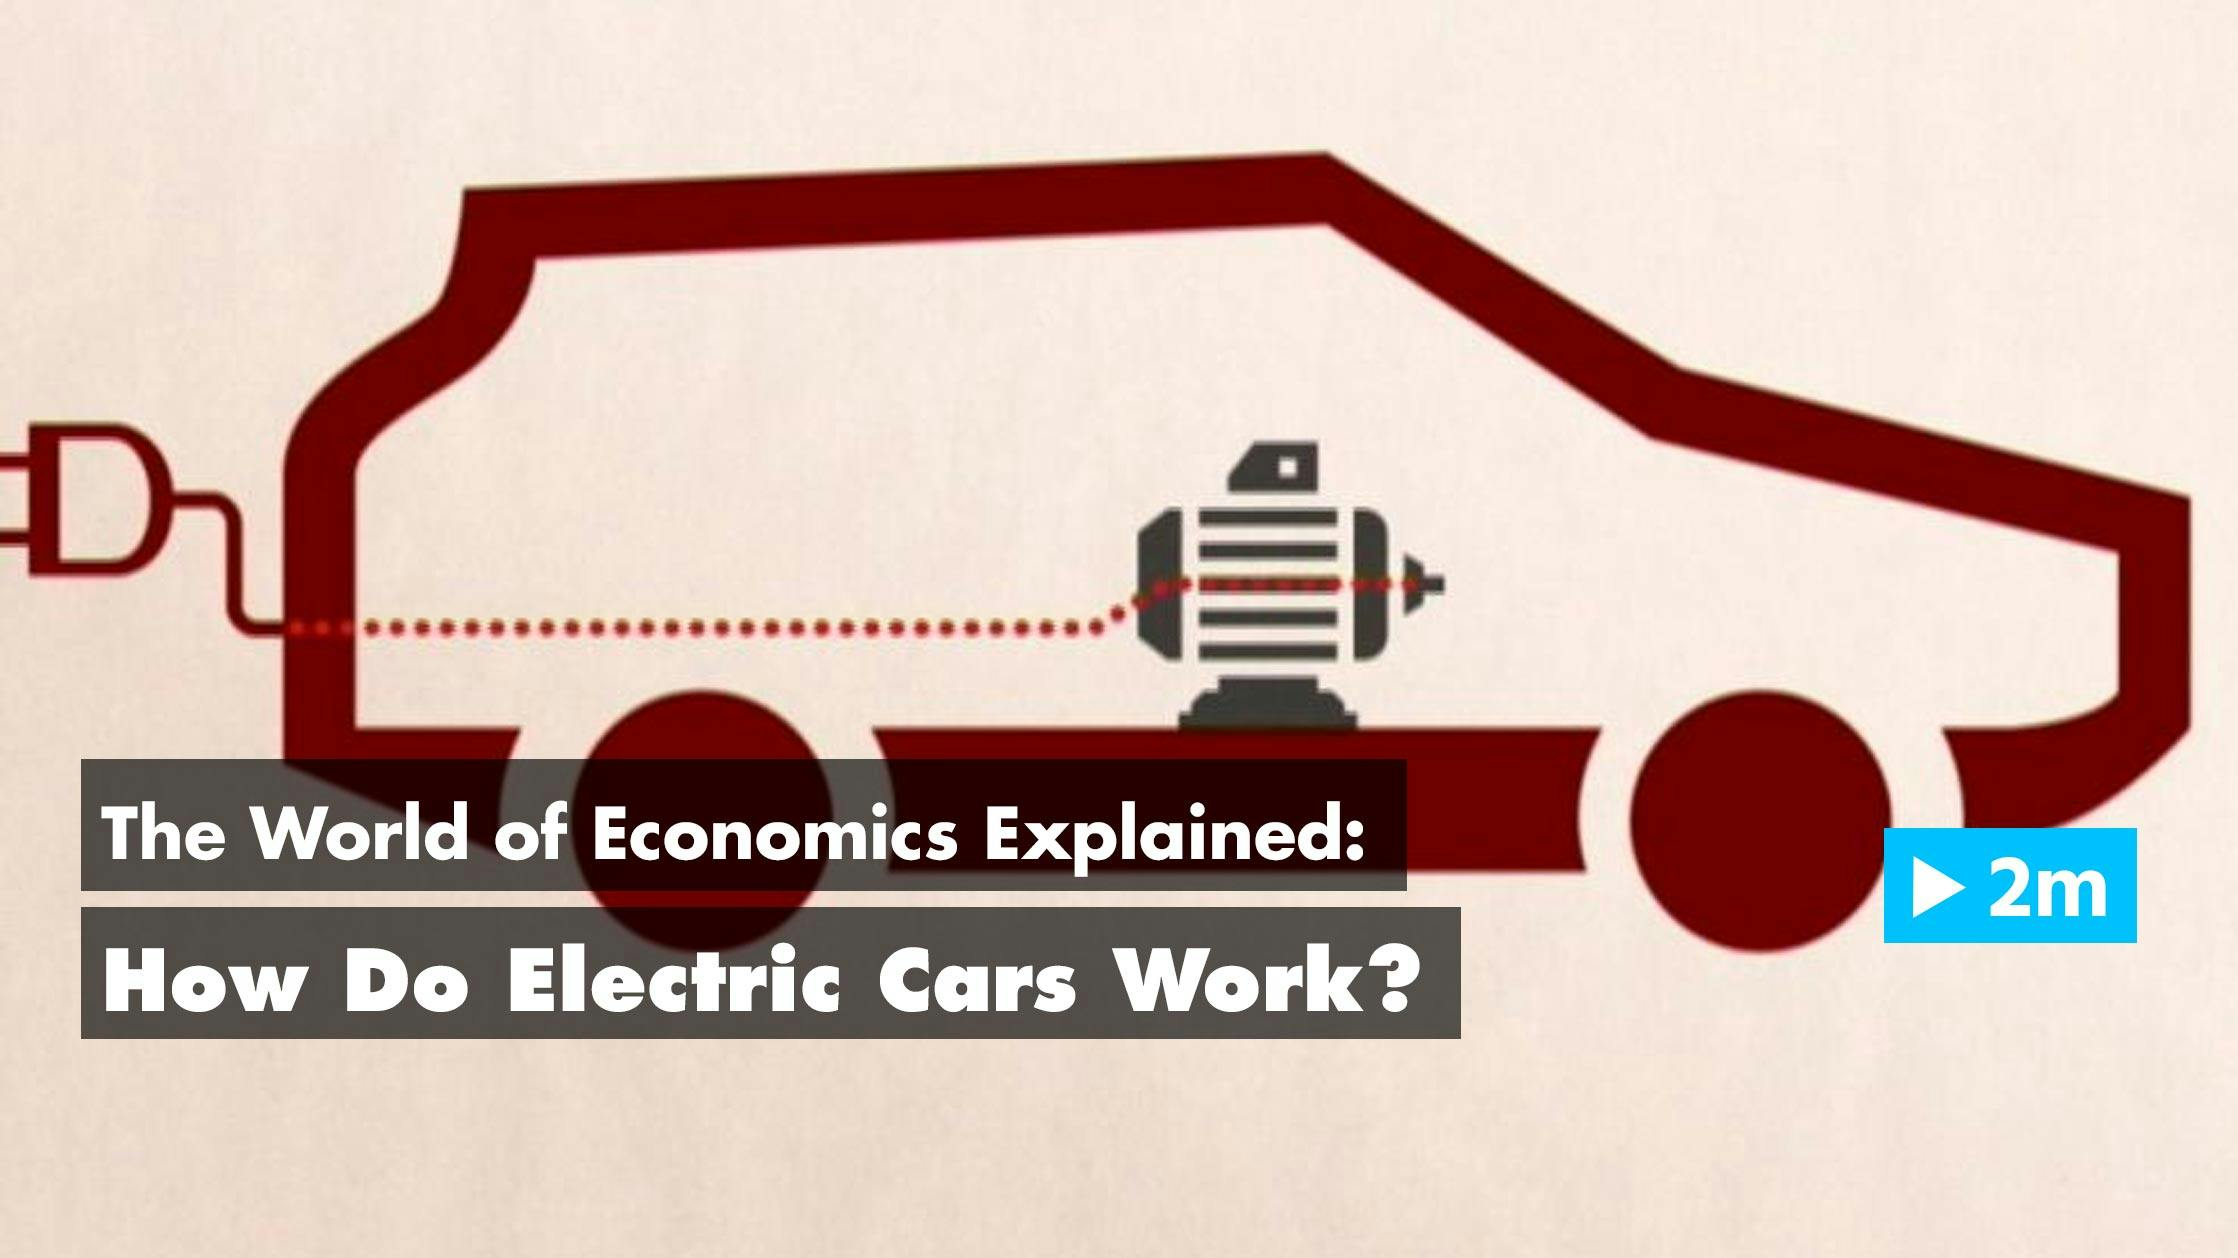 The World of Economics Explained: How do electric cars work?